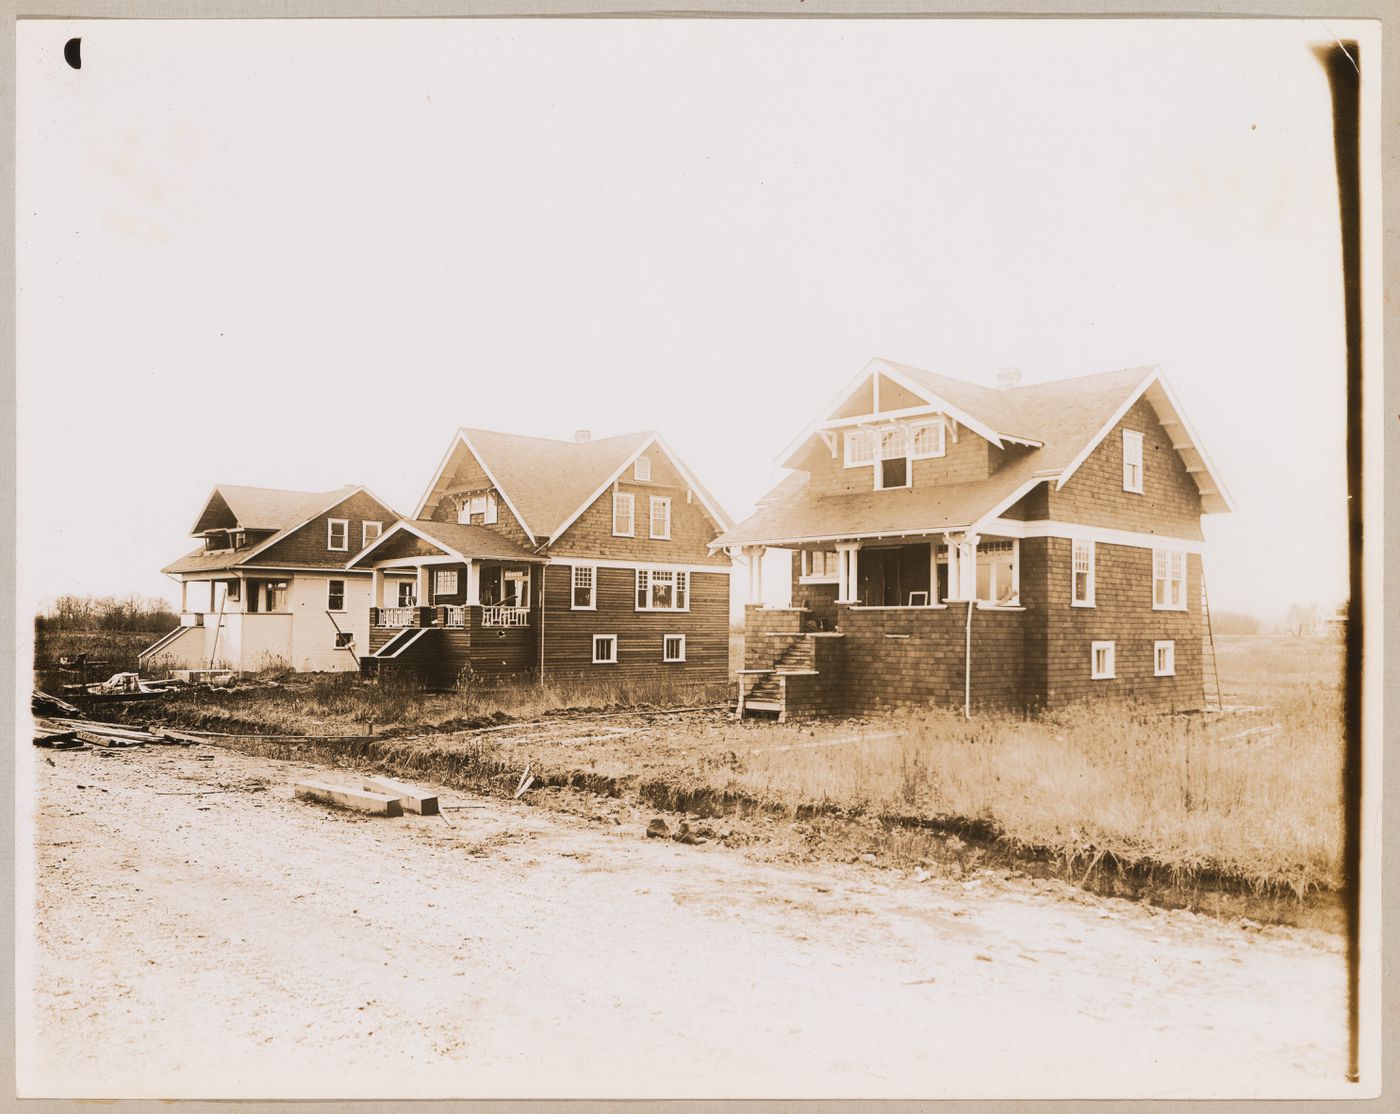 View of shingled houses, Coquitlam (now Port Coquitlam), British Columbia